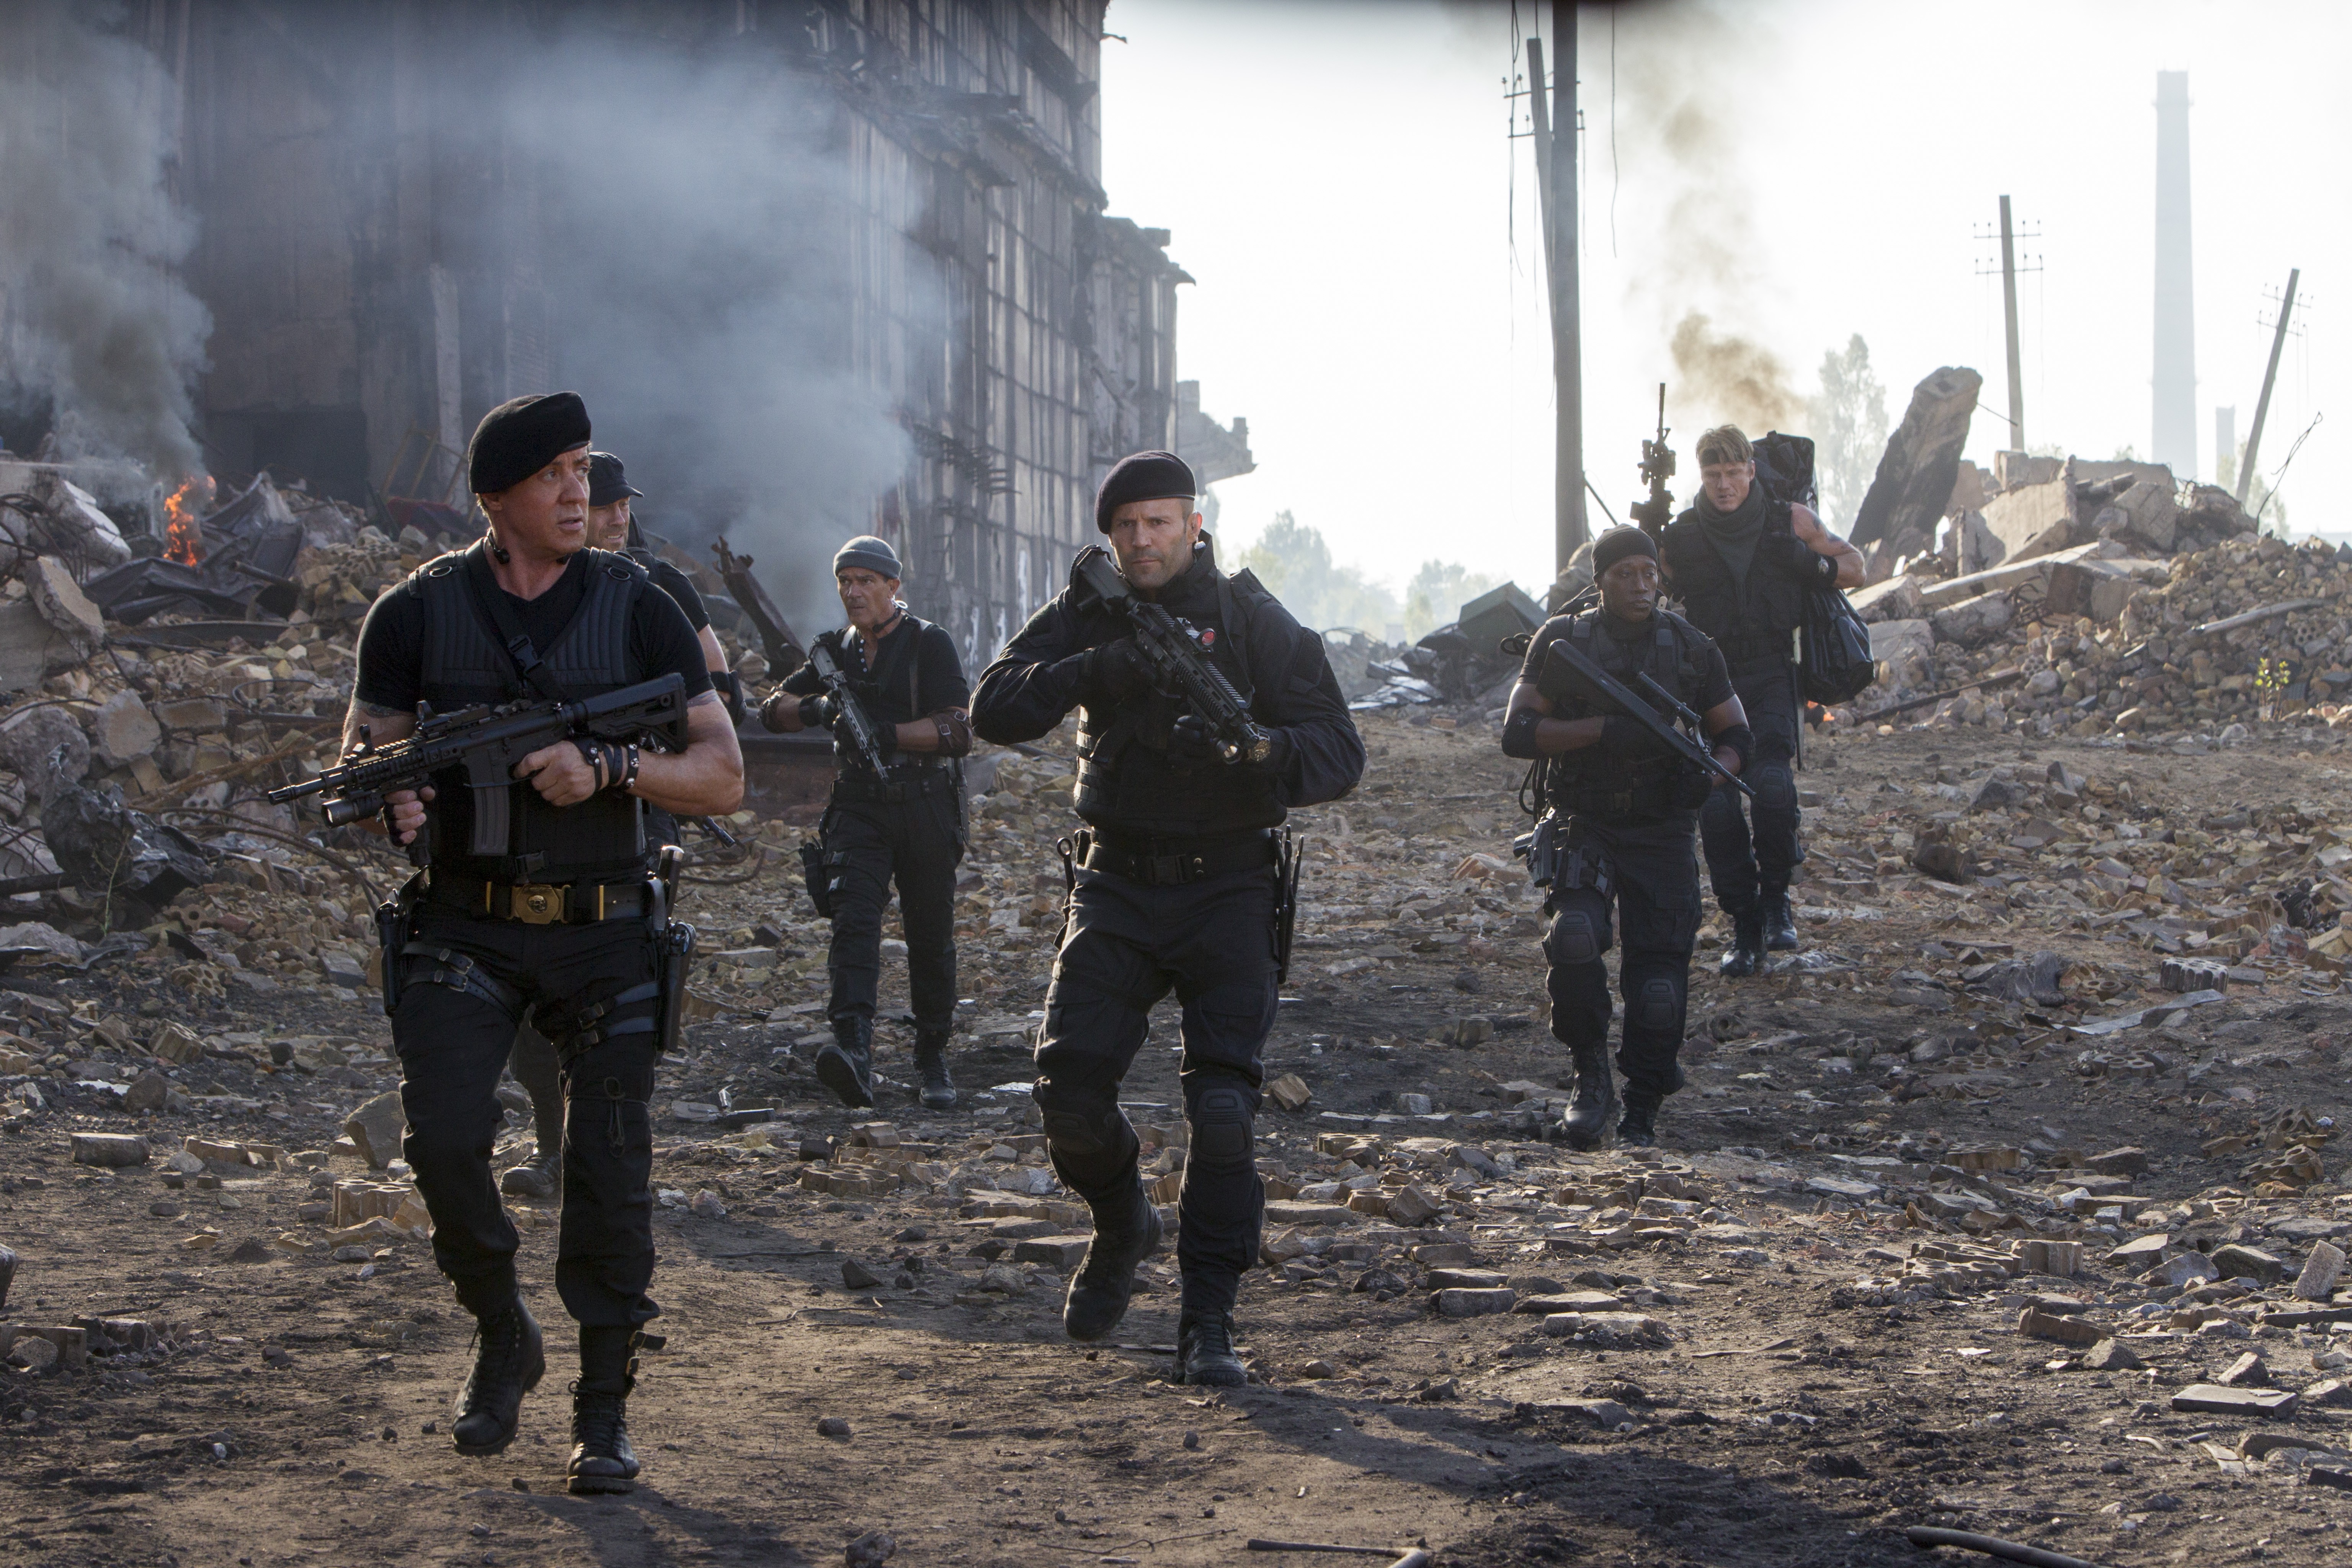 jason statham, movie, the expendables 3, antonio banderas, barney ross, doc (the expendables), dolph lundgren, galgo (the expendables), gunnar jensen, lee christmas, sylvester stallone, wesley snipes, the expendables